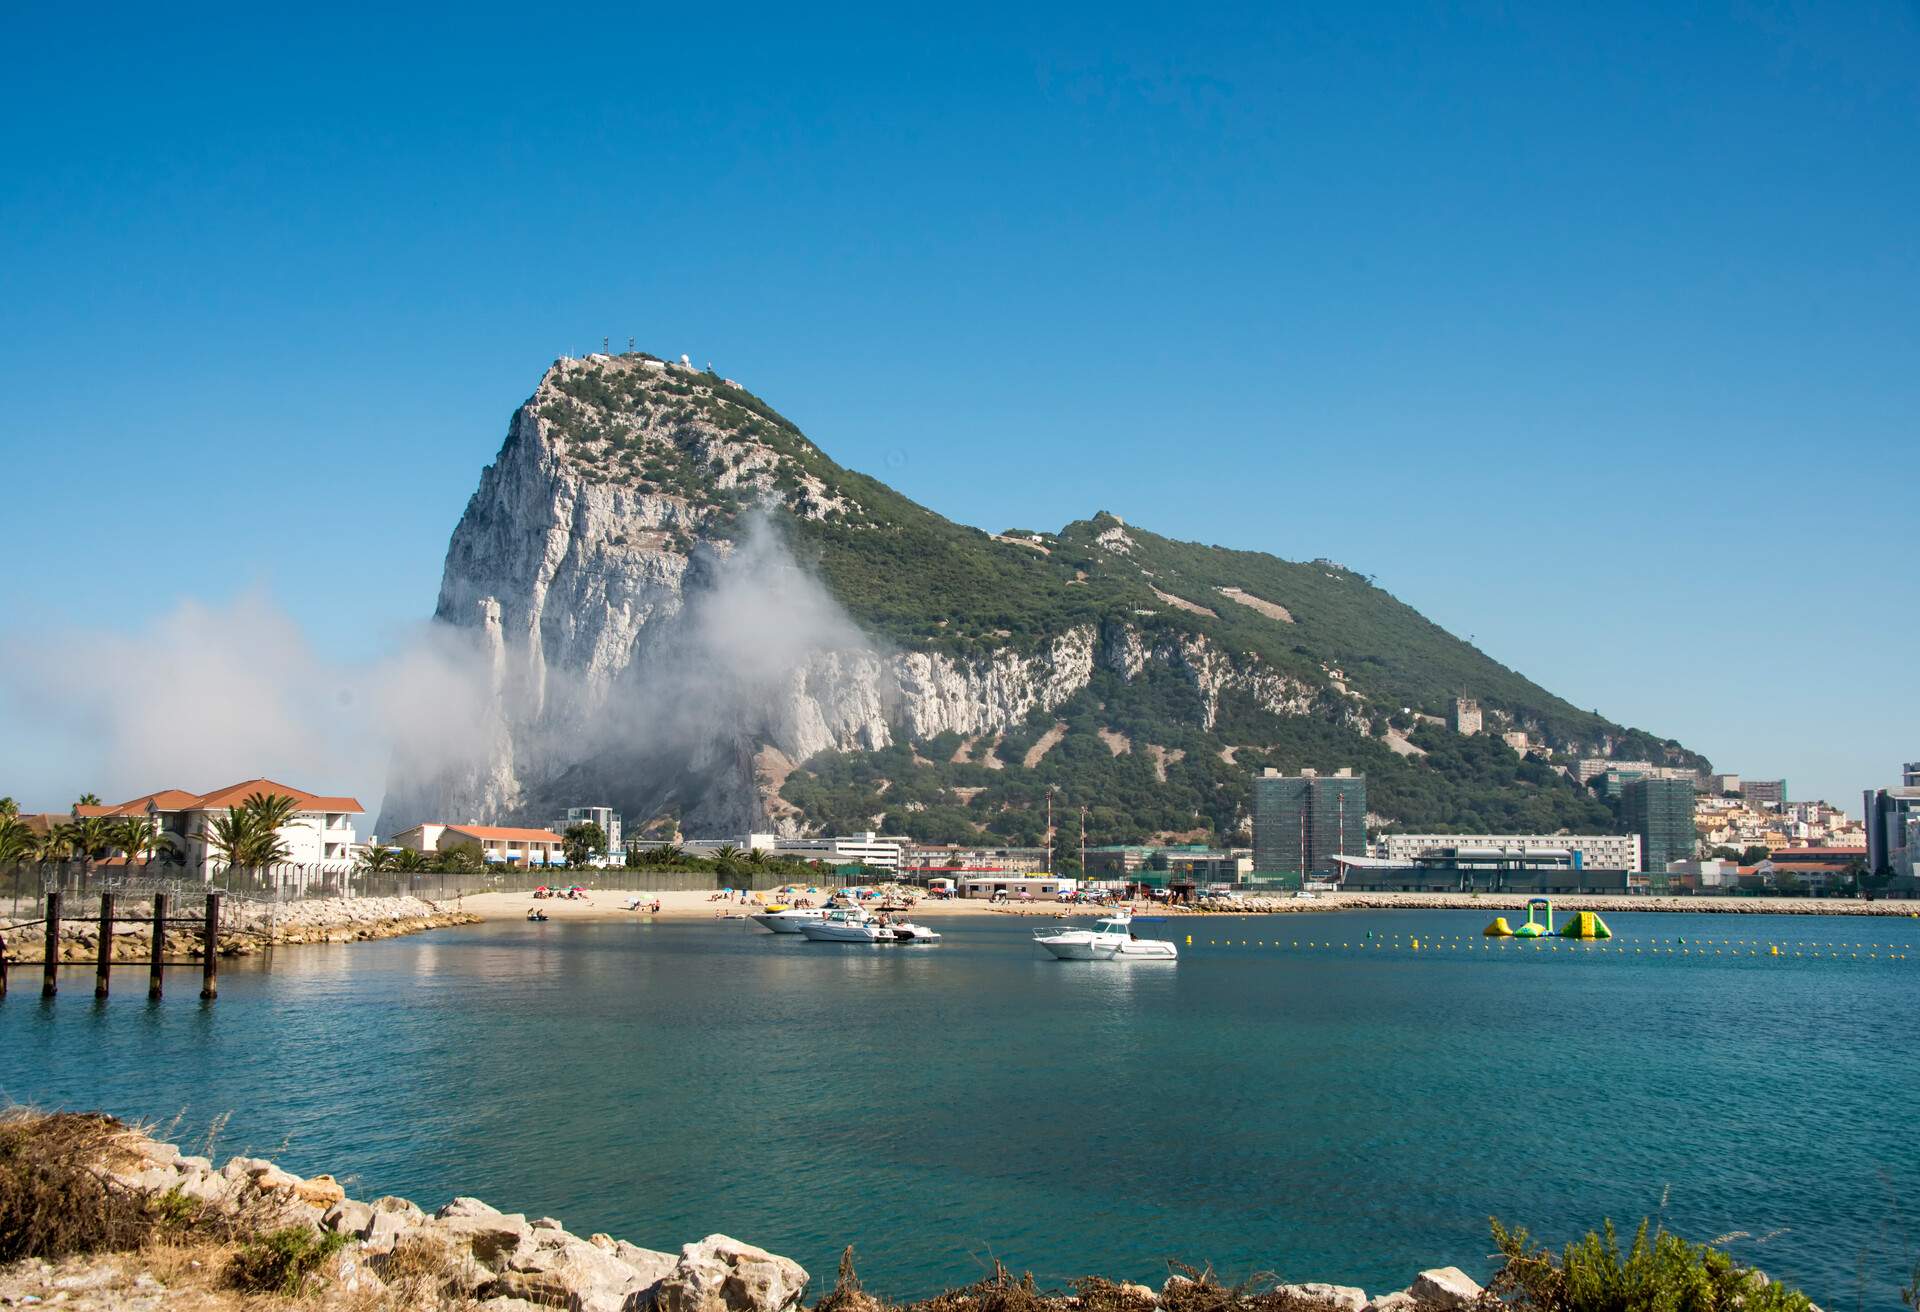 View of the Rock of Gibraltar and Mediterranean Sea , which is a British Overseas Territory, located on the southern end of the Iberian Peninsula